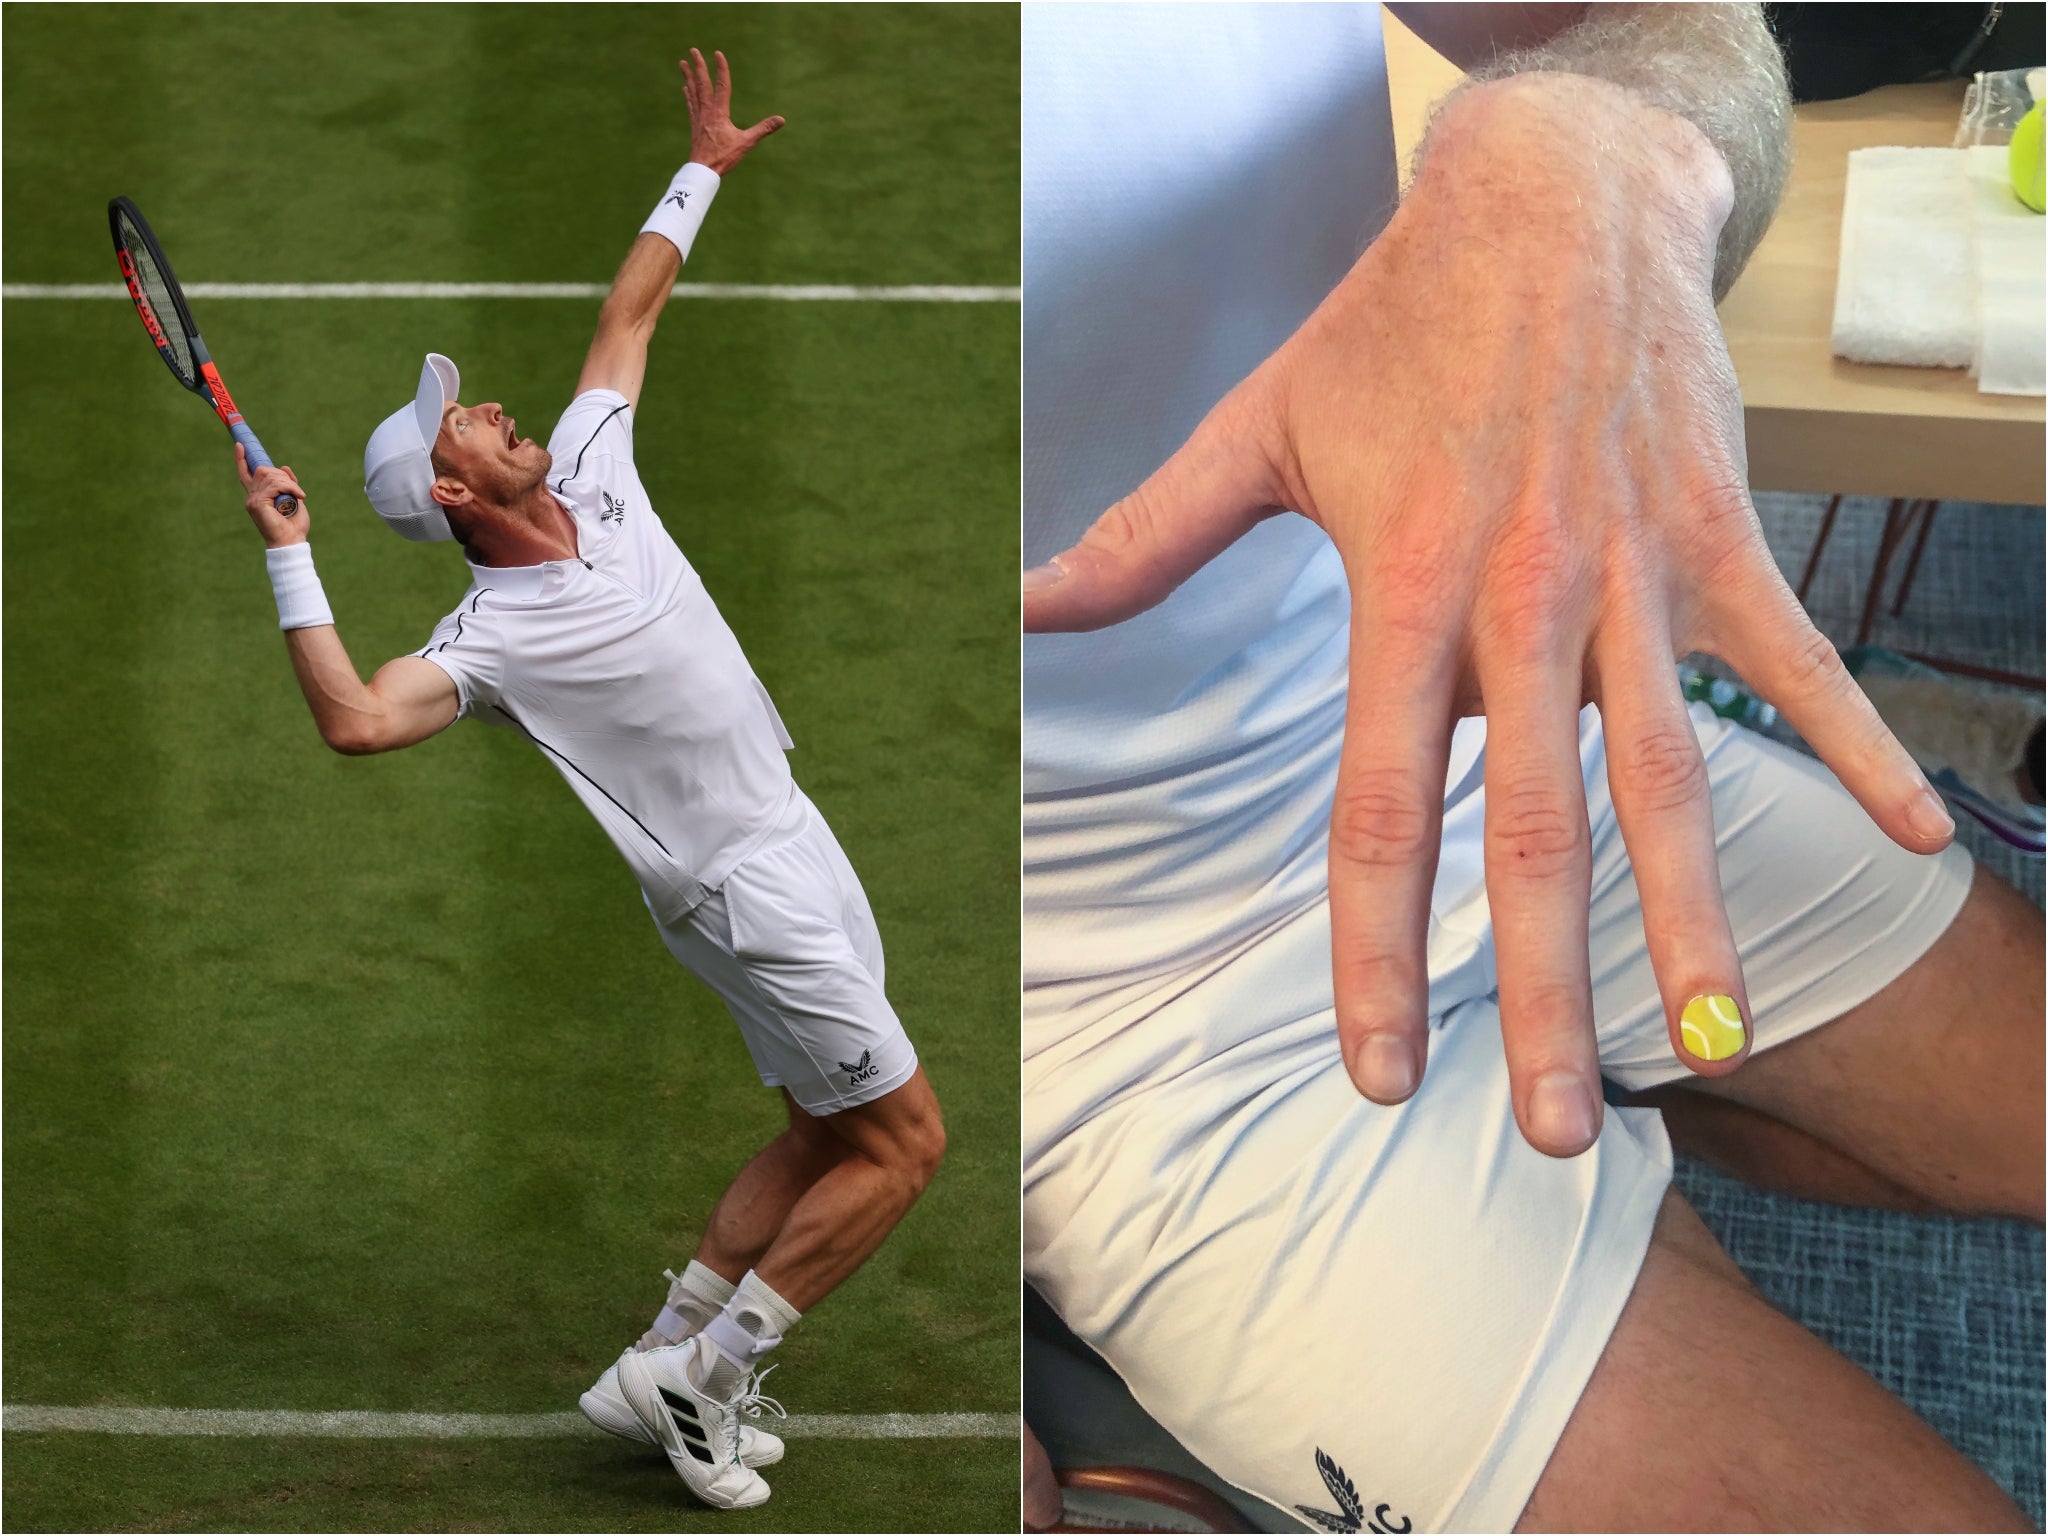 Andy Murray shows off his limited-edition nail designs during Wimbledon